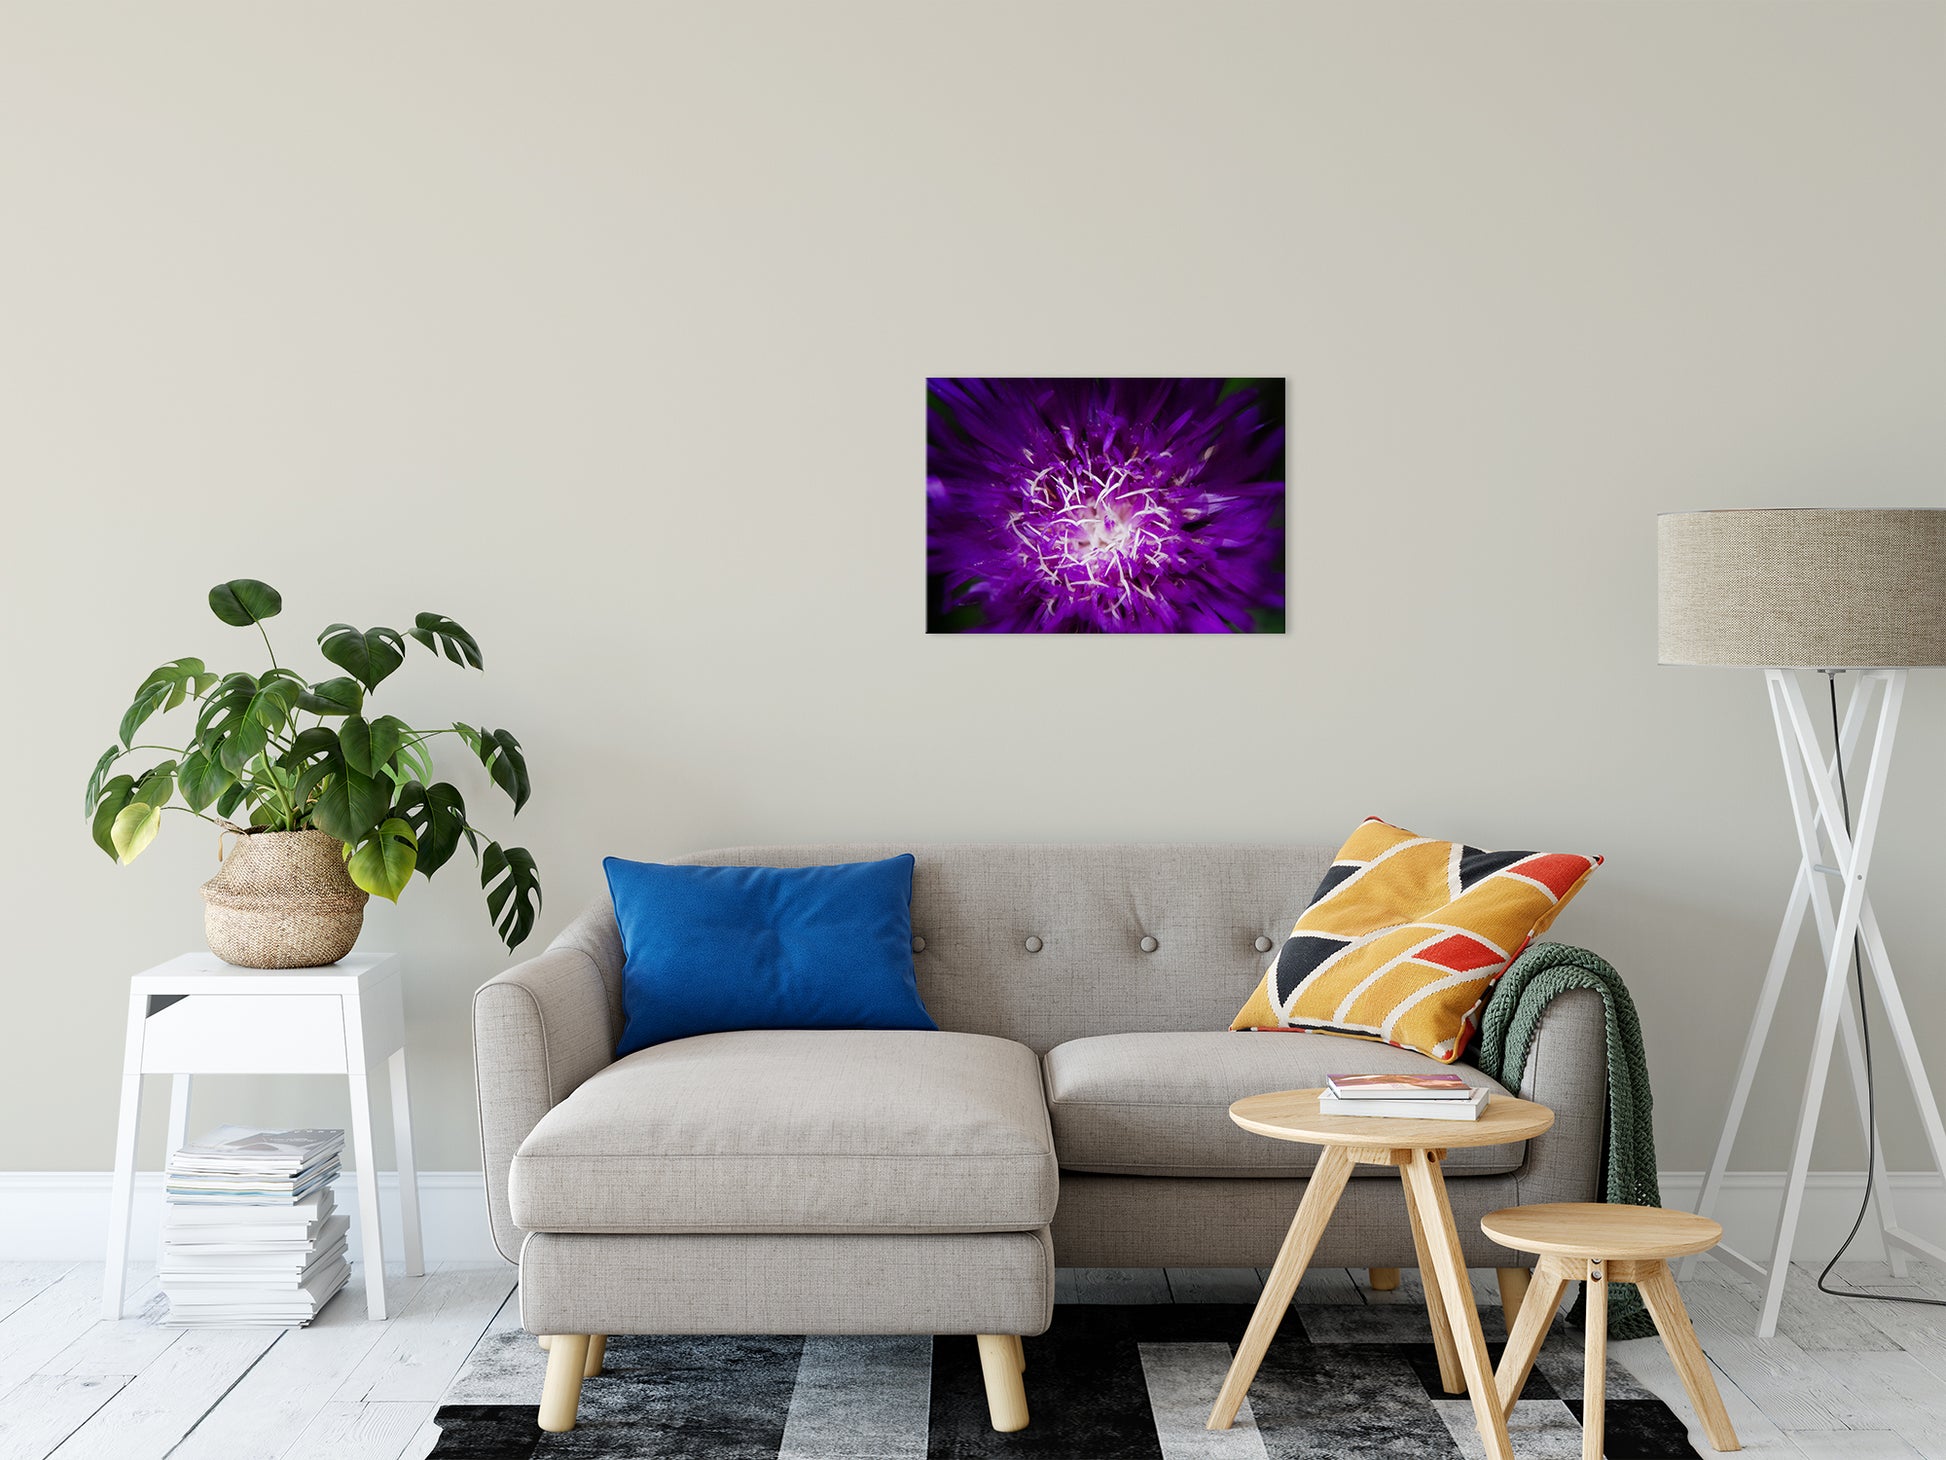 Big Flower Canvas: Abstract Flower Nature / Floral Photo Fine Art Canvas Wall Art Prints 20" x 24" - PIPAFINEART